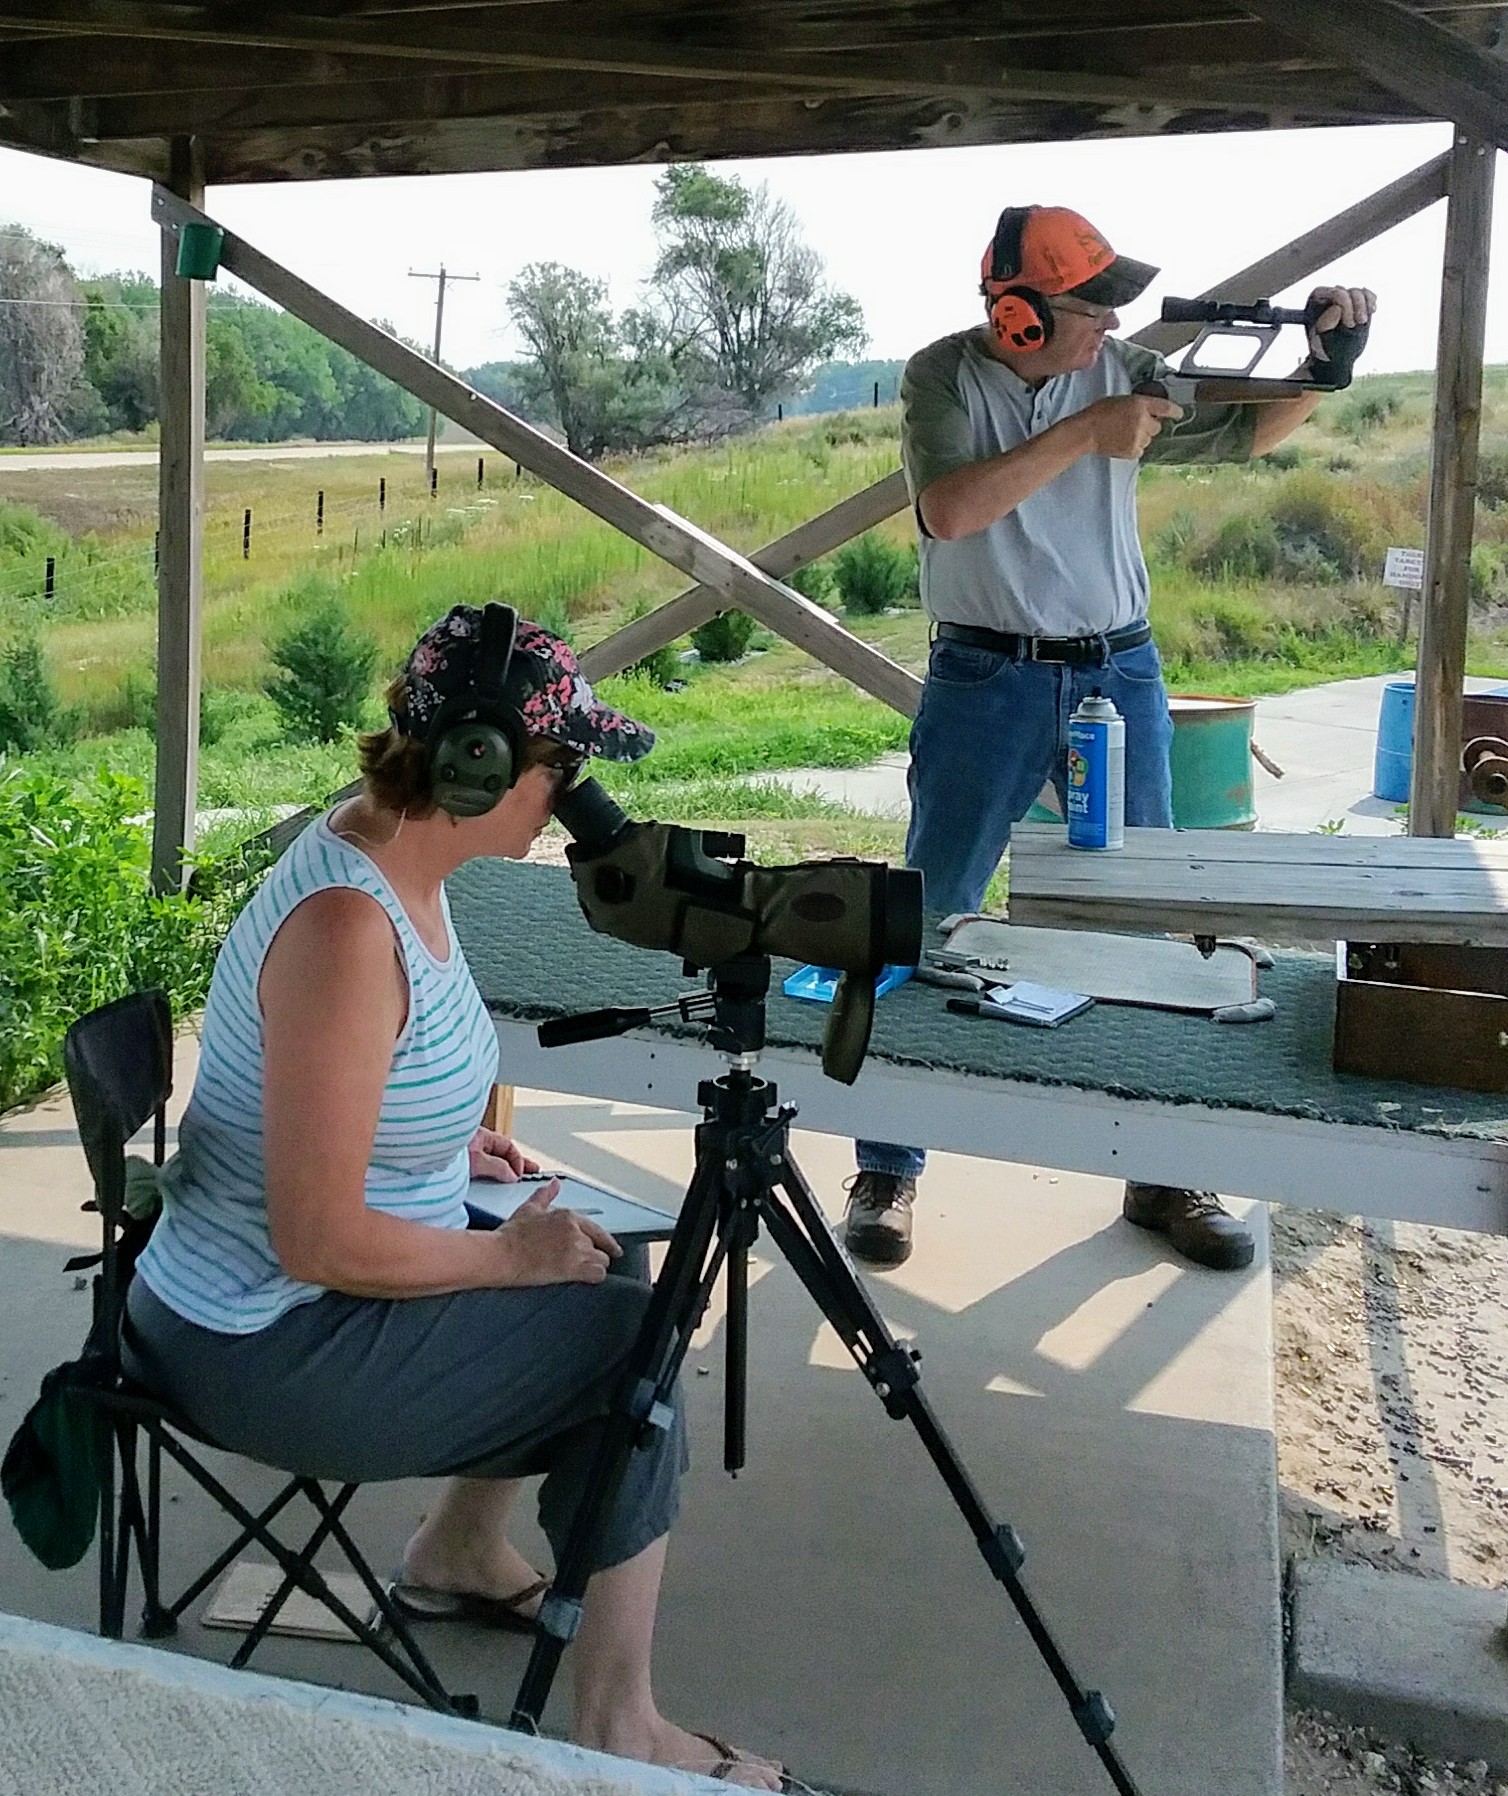 Russ and Syrena Plakke show how they work together in shooting competitions. Photo credit: Russ Plakke